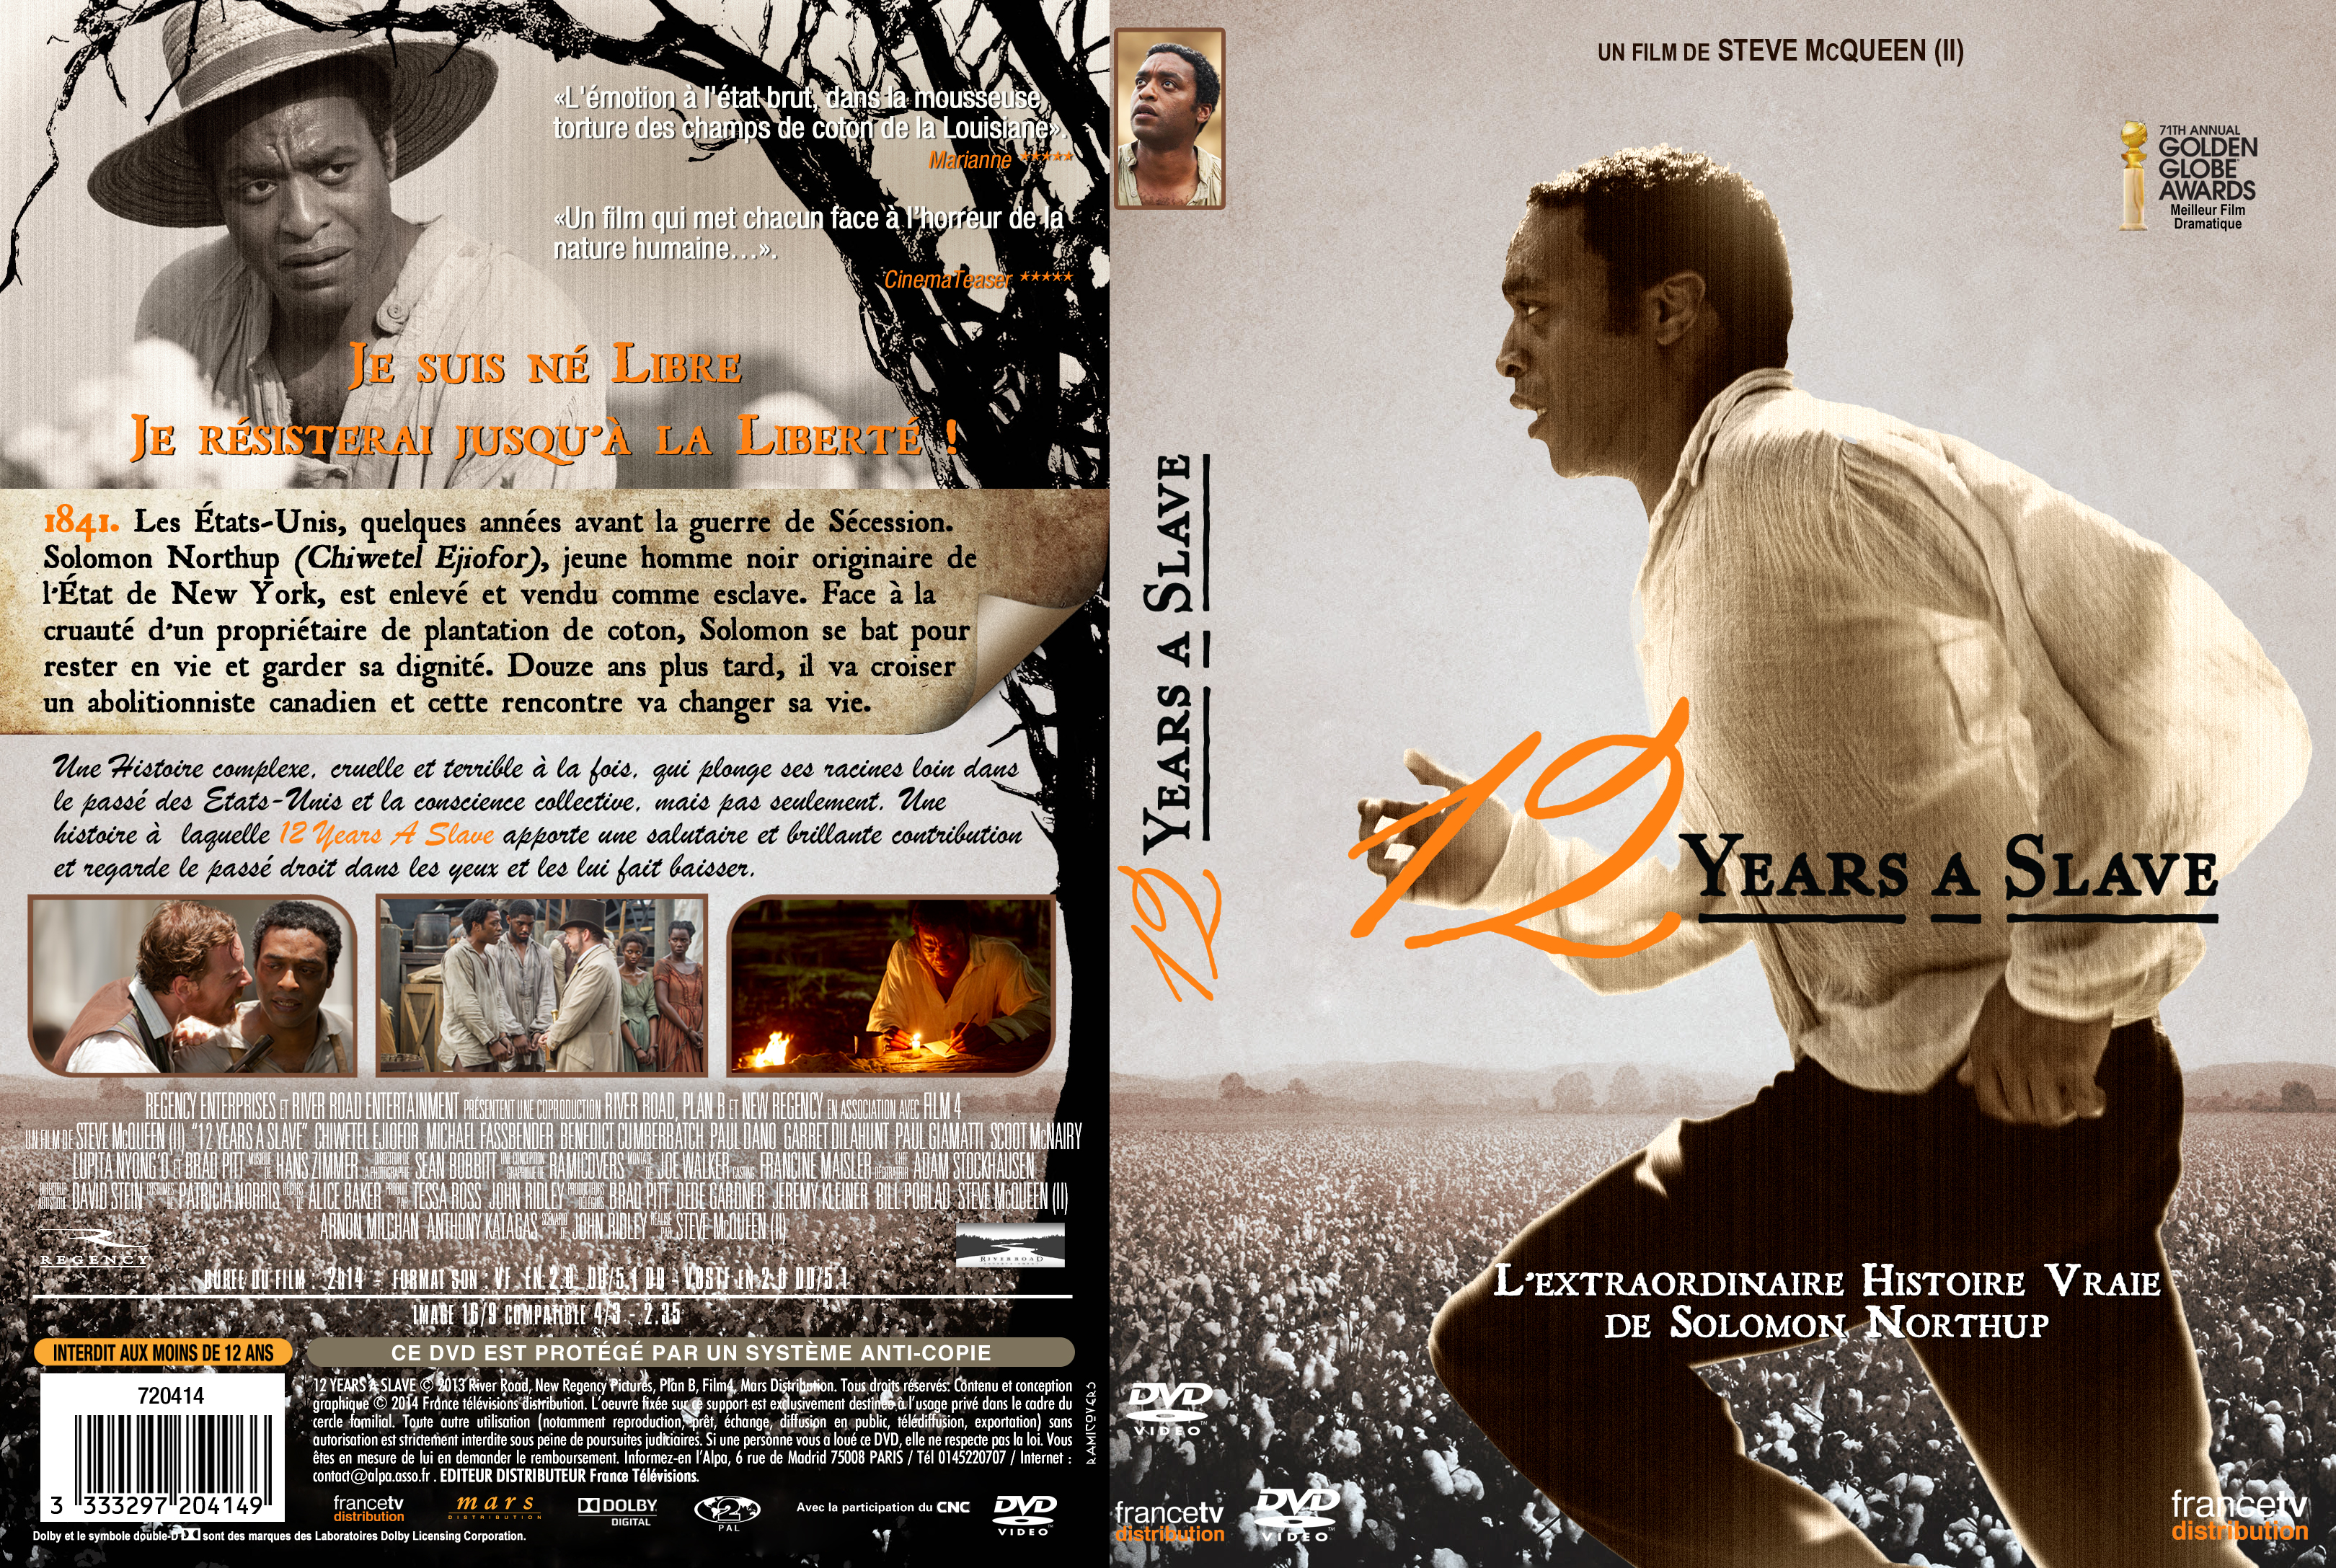 Jaquette DVD 12 Years a Slave custom